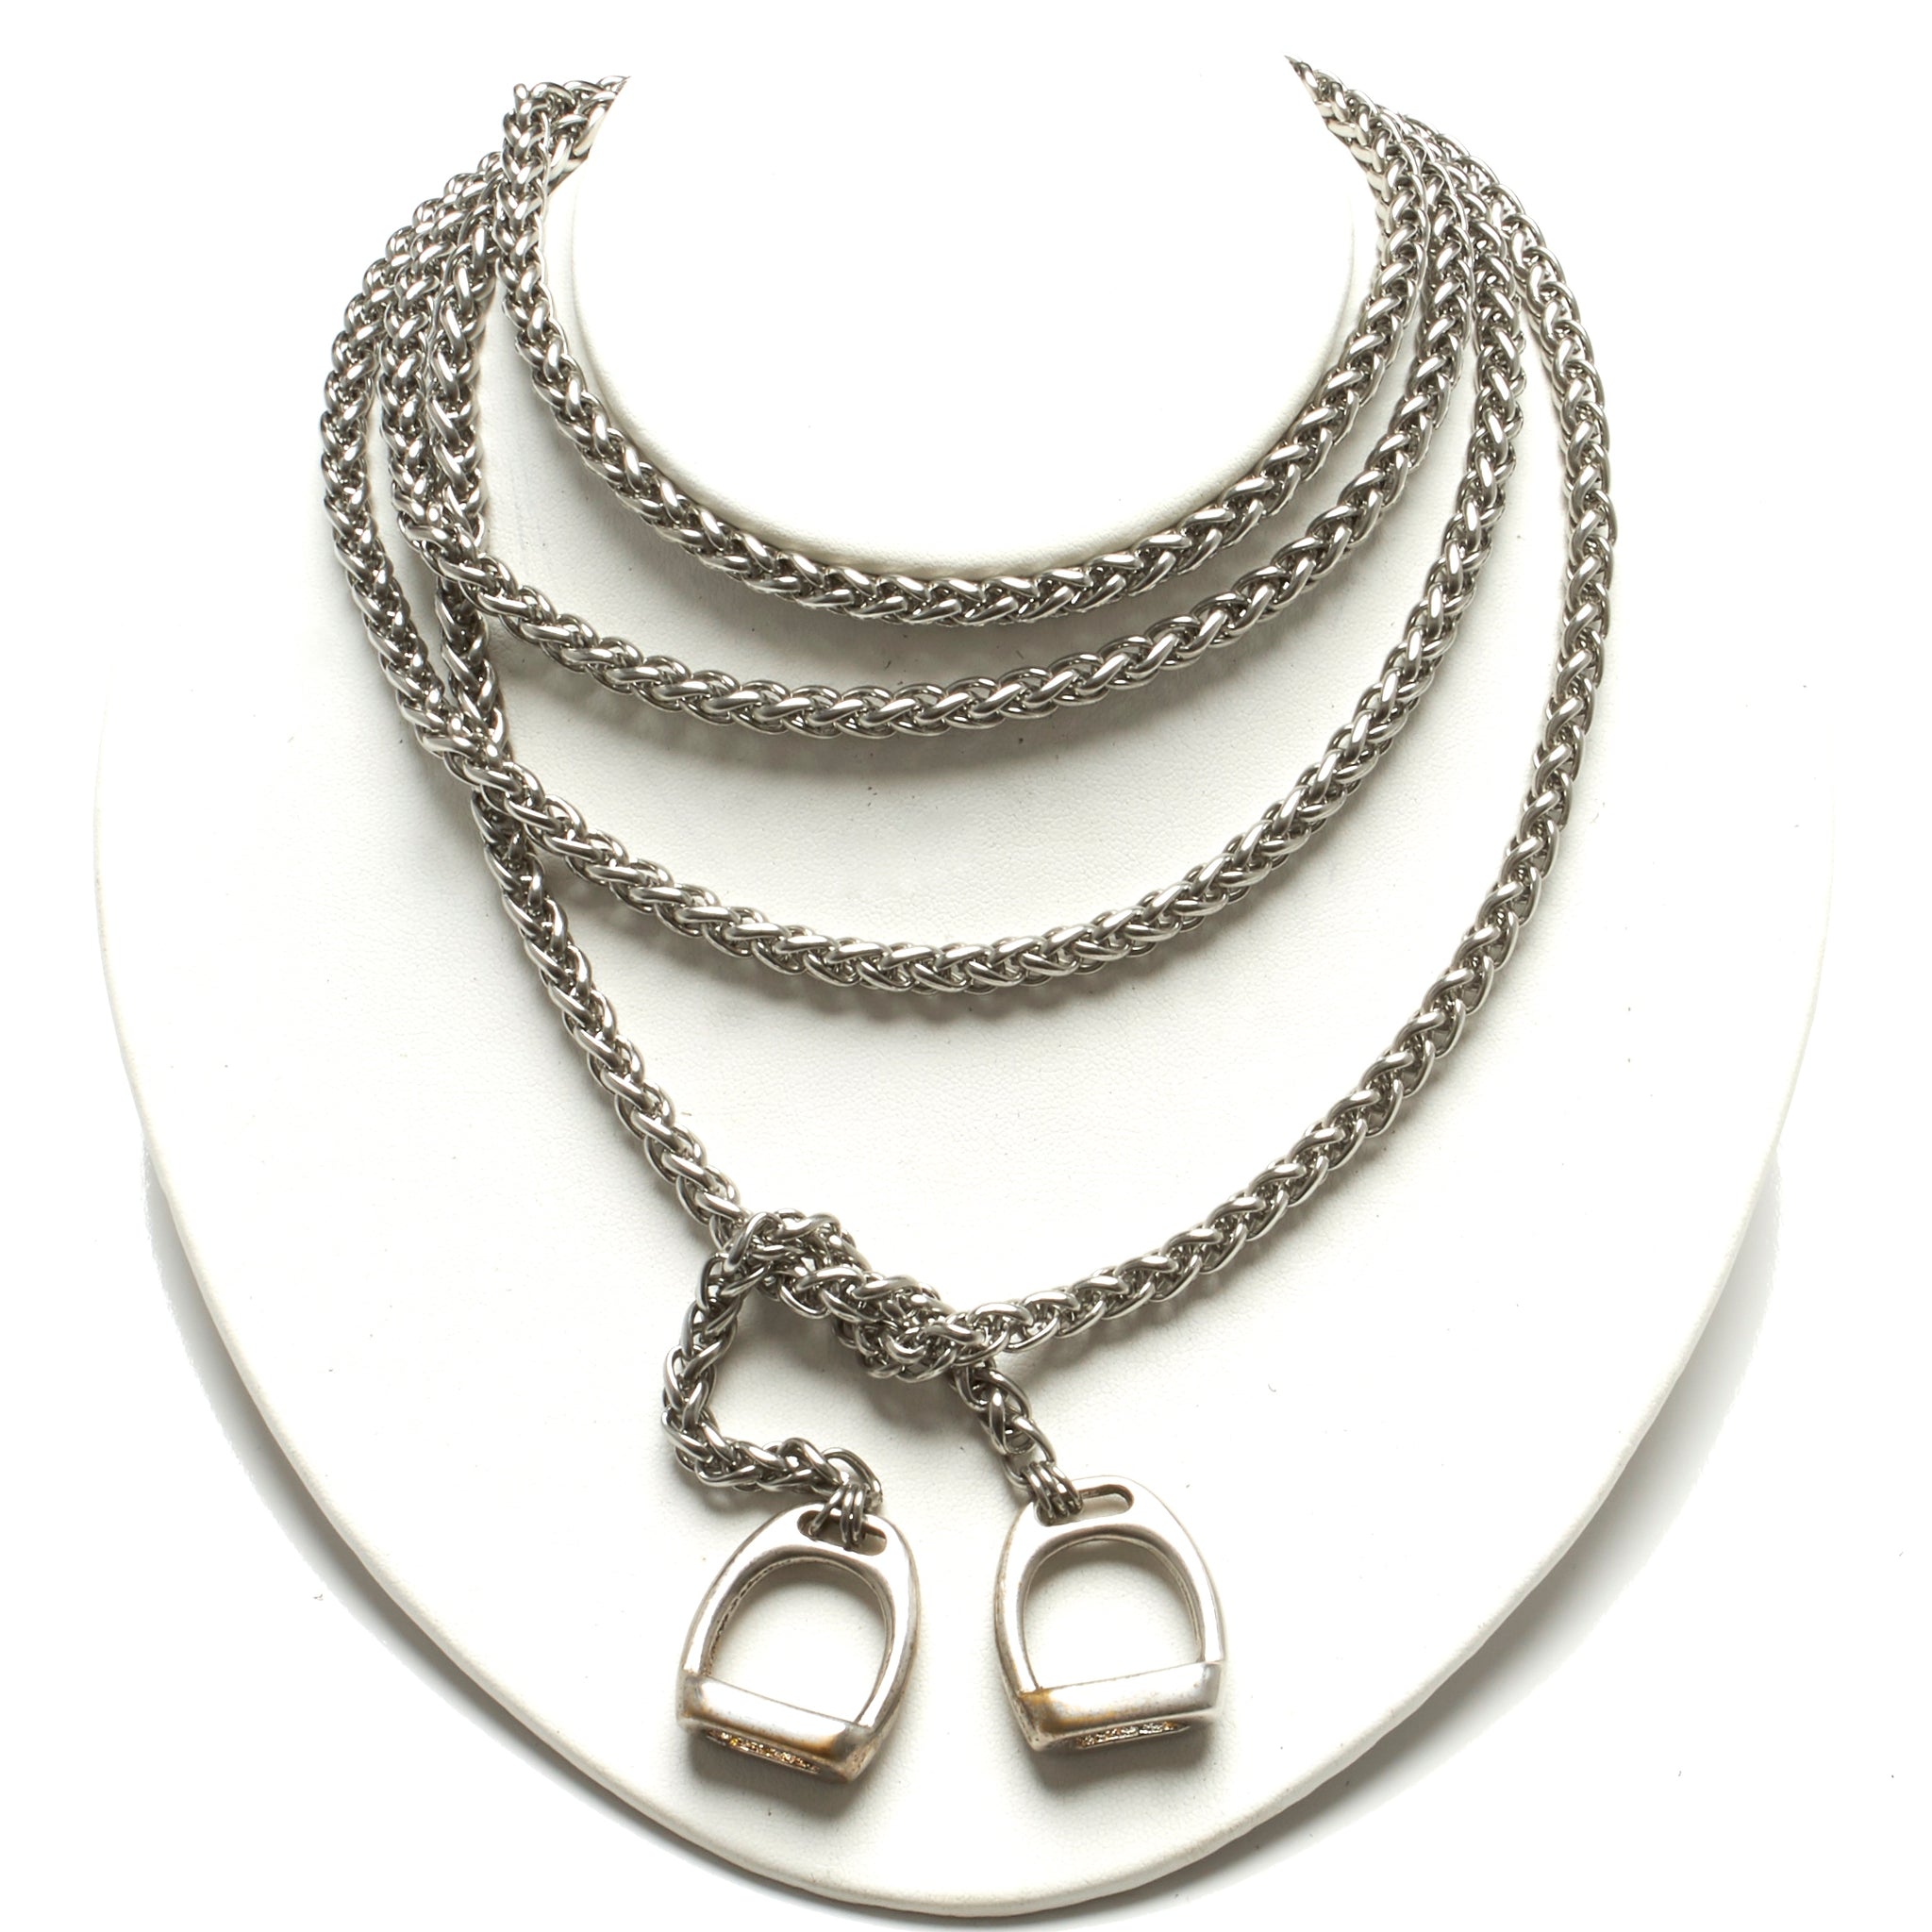 Extra Long Stainless Steel Lariat With stirrups by nyet jewelry.